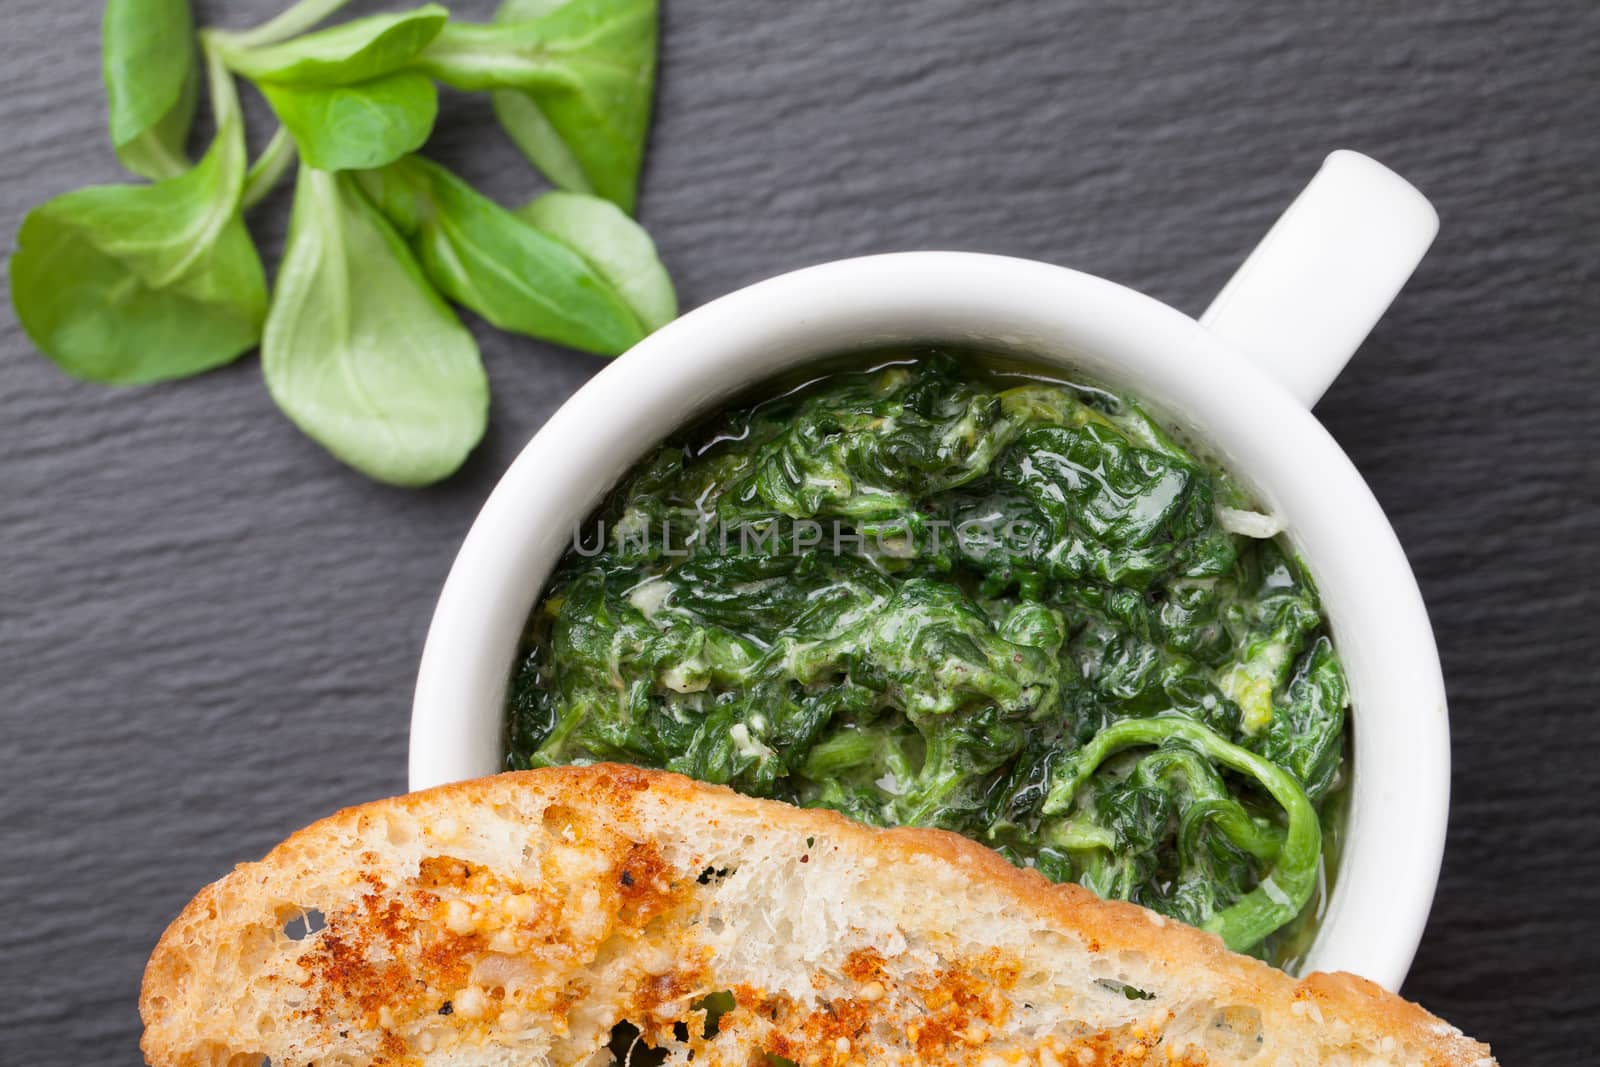 Appetizer sauteed garlic spinach dish in cup, baked bread slice  with  melted cheese served on black stone